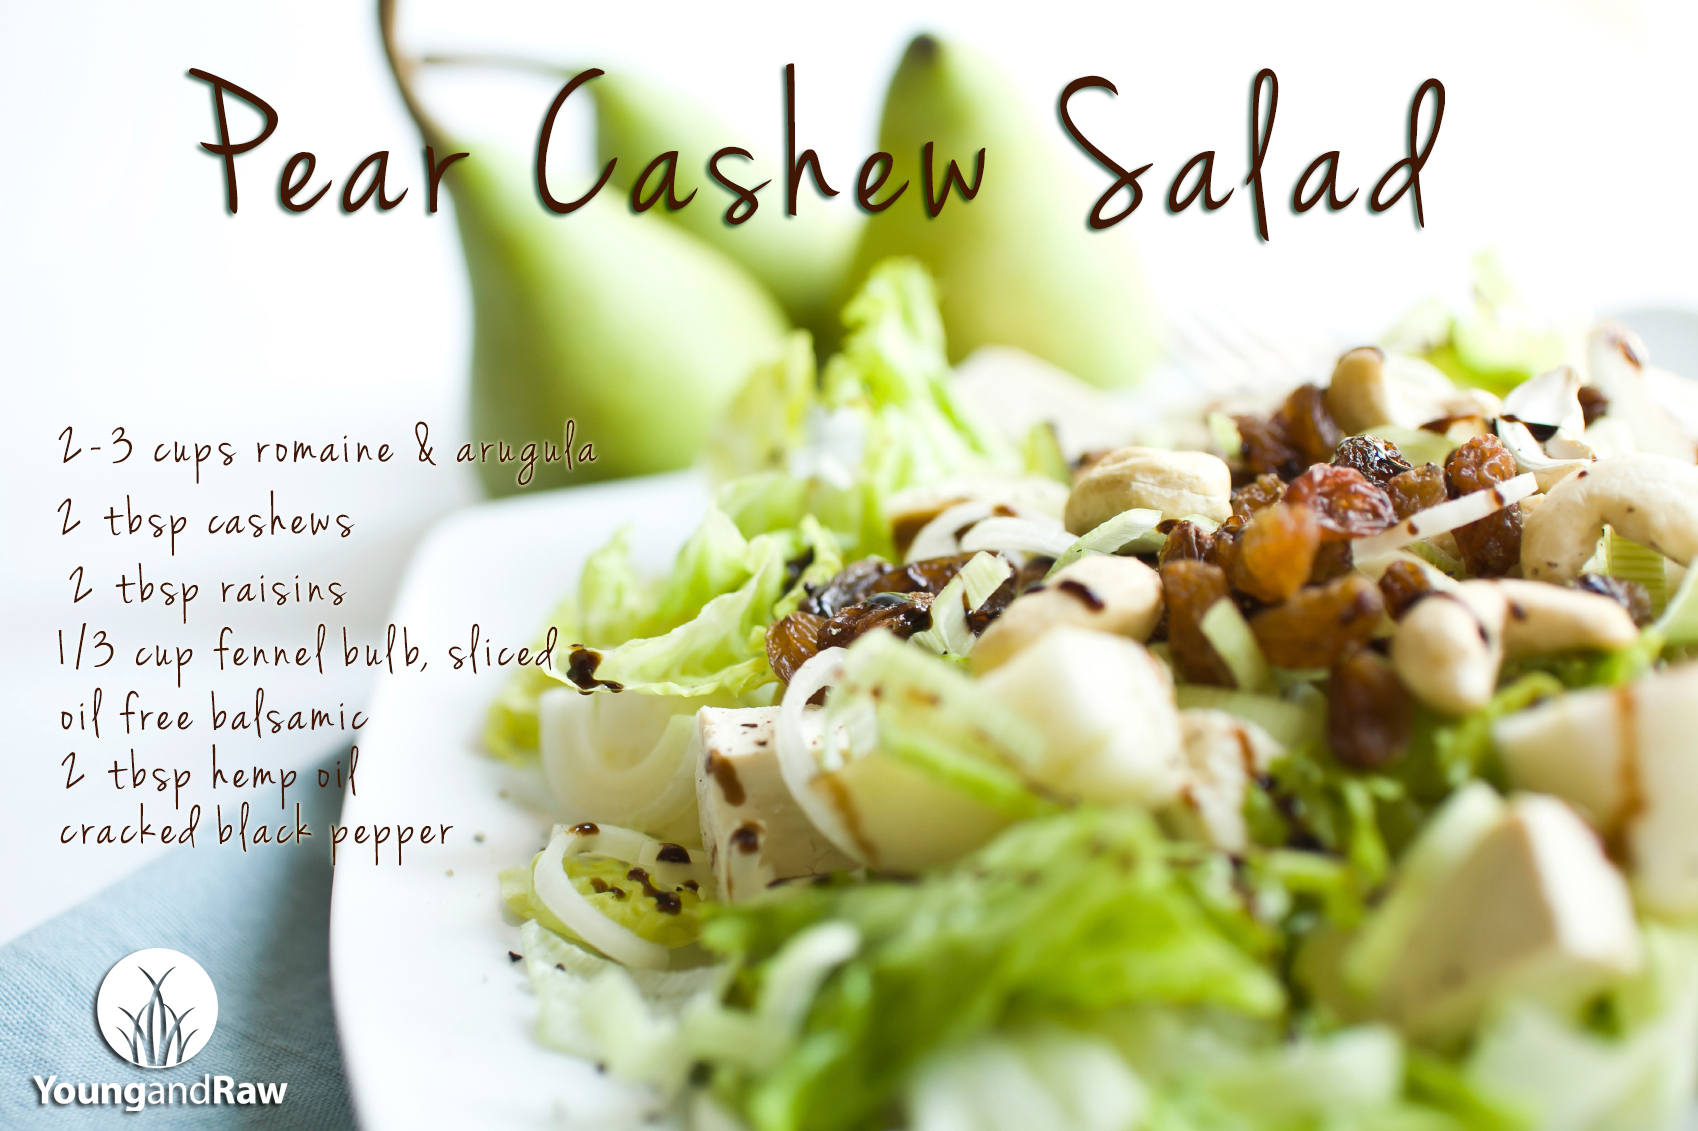 Pear Cashew Salad Recipe (vegan) | Young and Raw